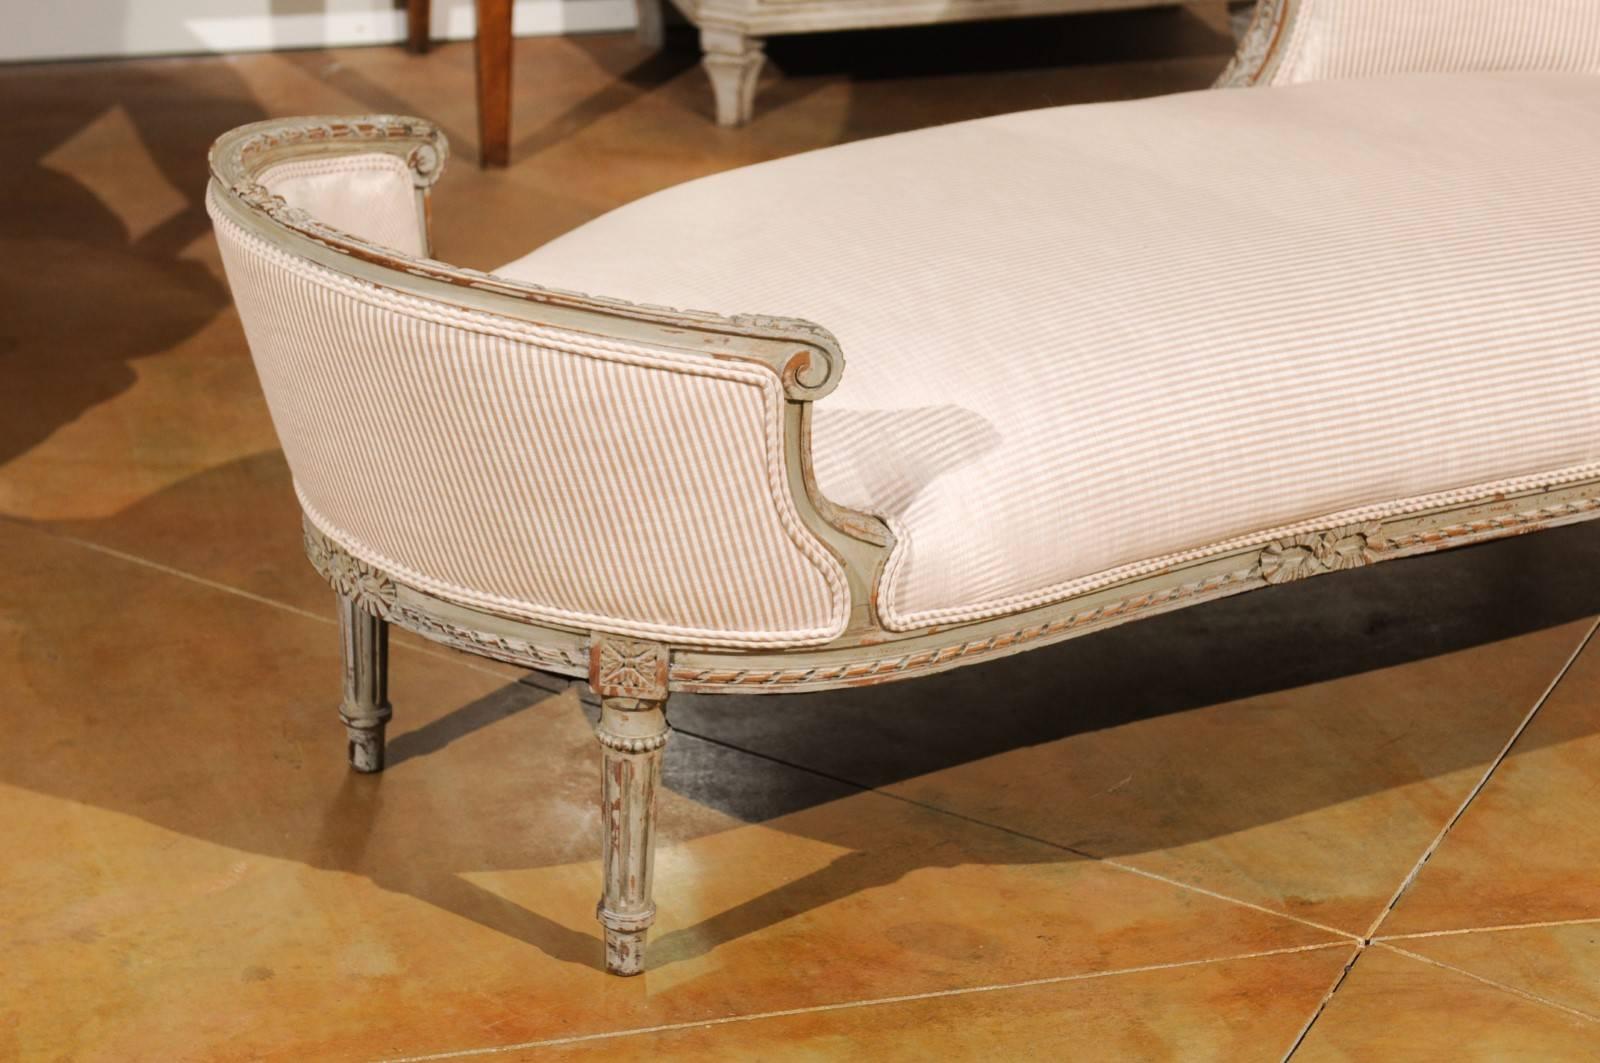 A French Louis XVI style painted and carved wood daybed from the 19th century, with twisted ribbon motifs, acanthus leaves and striped fabric. This French painted 'duchesse en bateau' features spectacular carved details on its entire structure. The